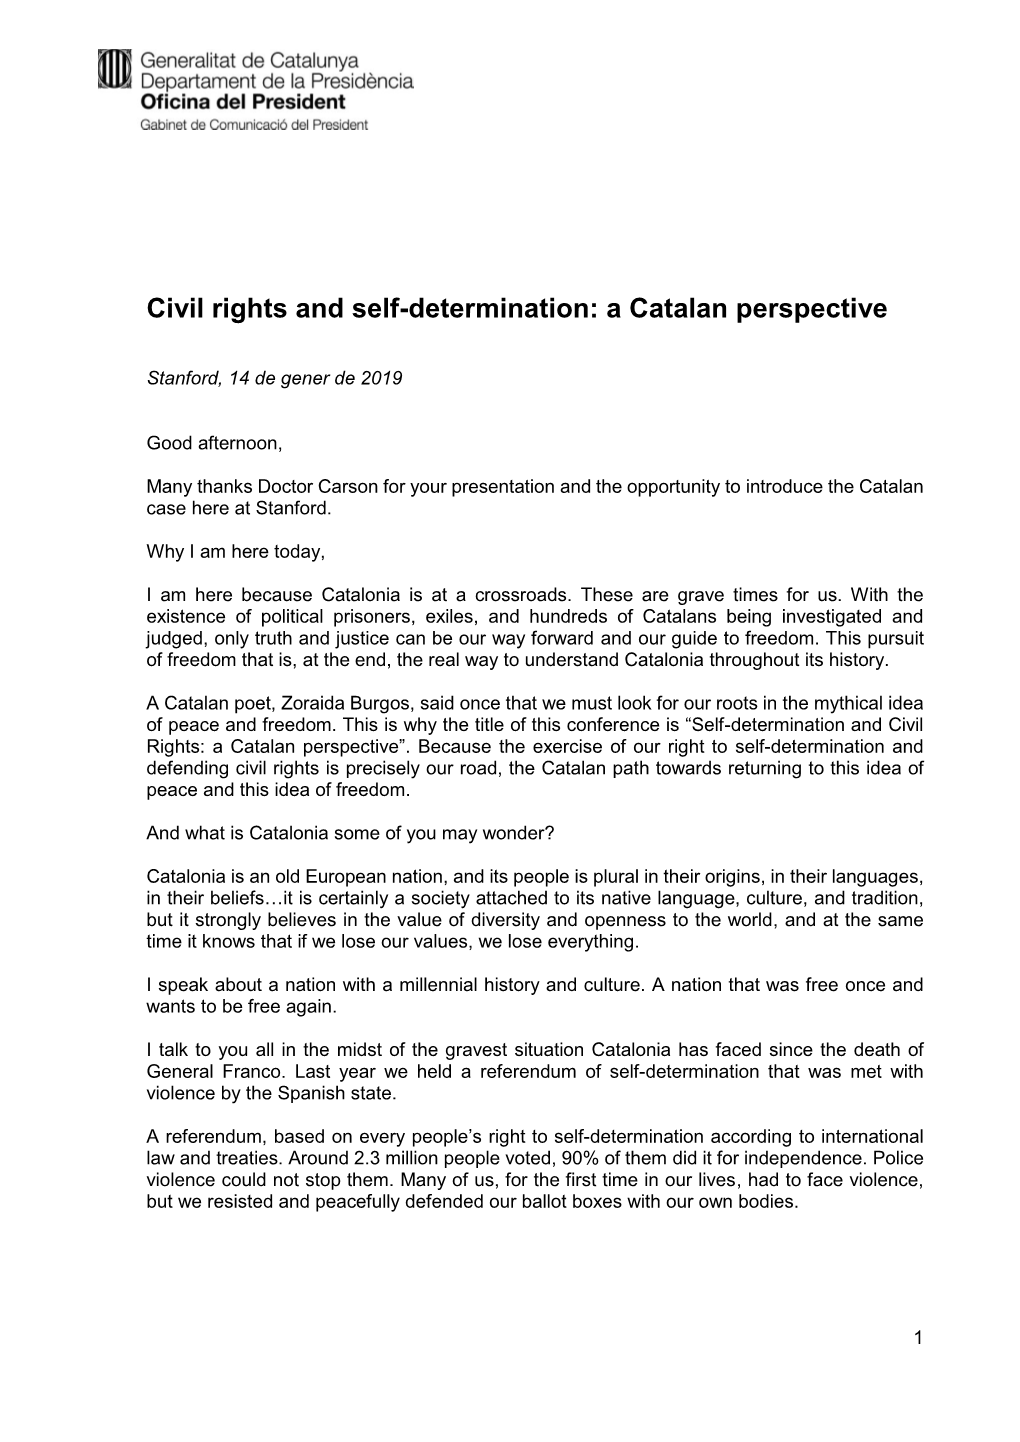 Civil Rights and Self-Determination: a Catalan Perspective